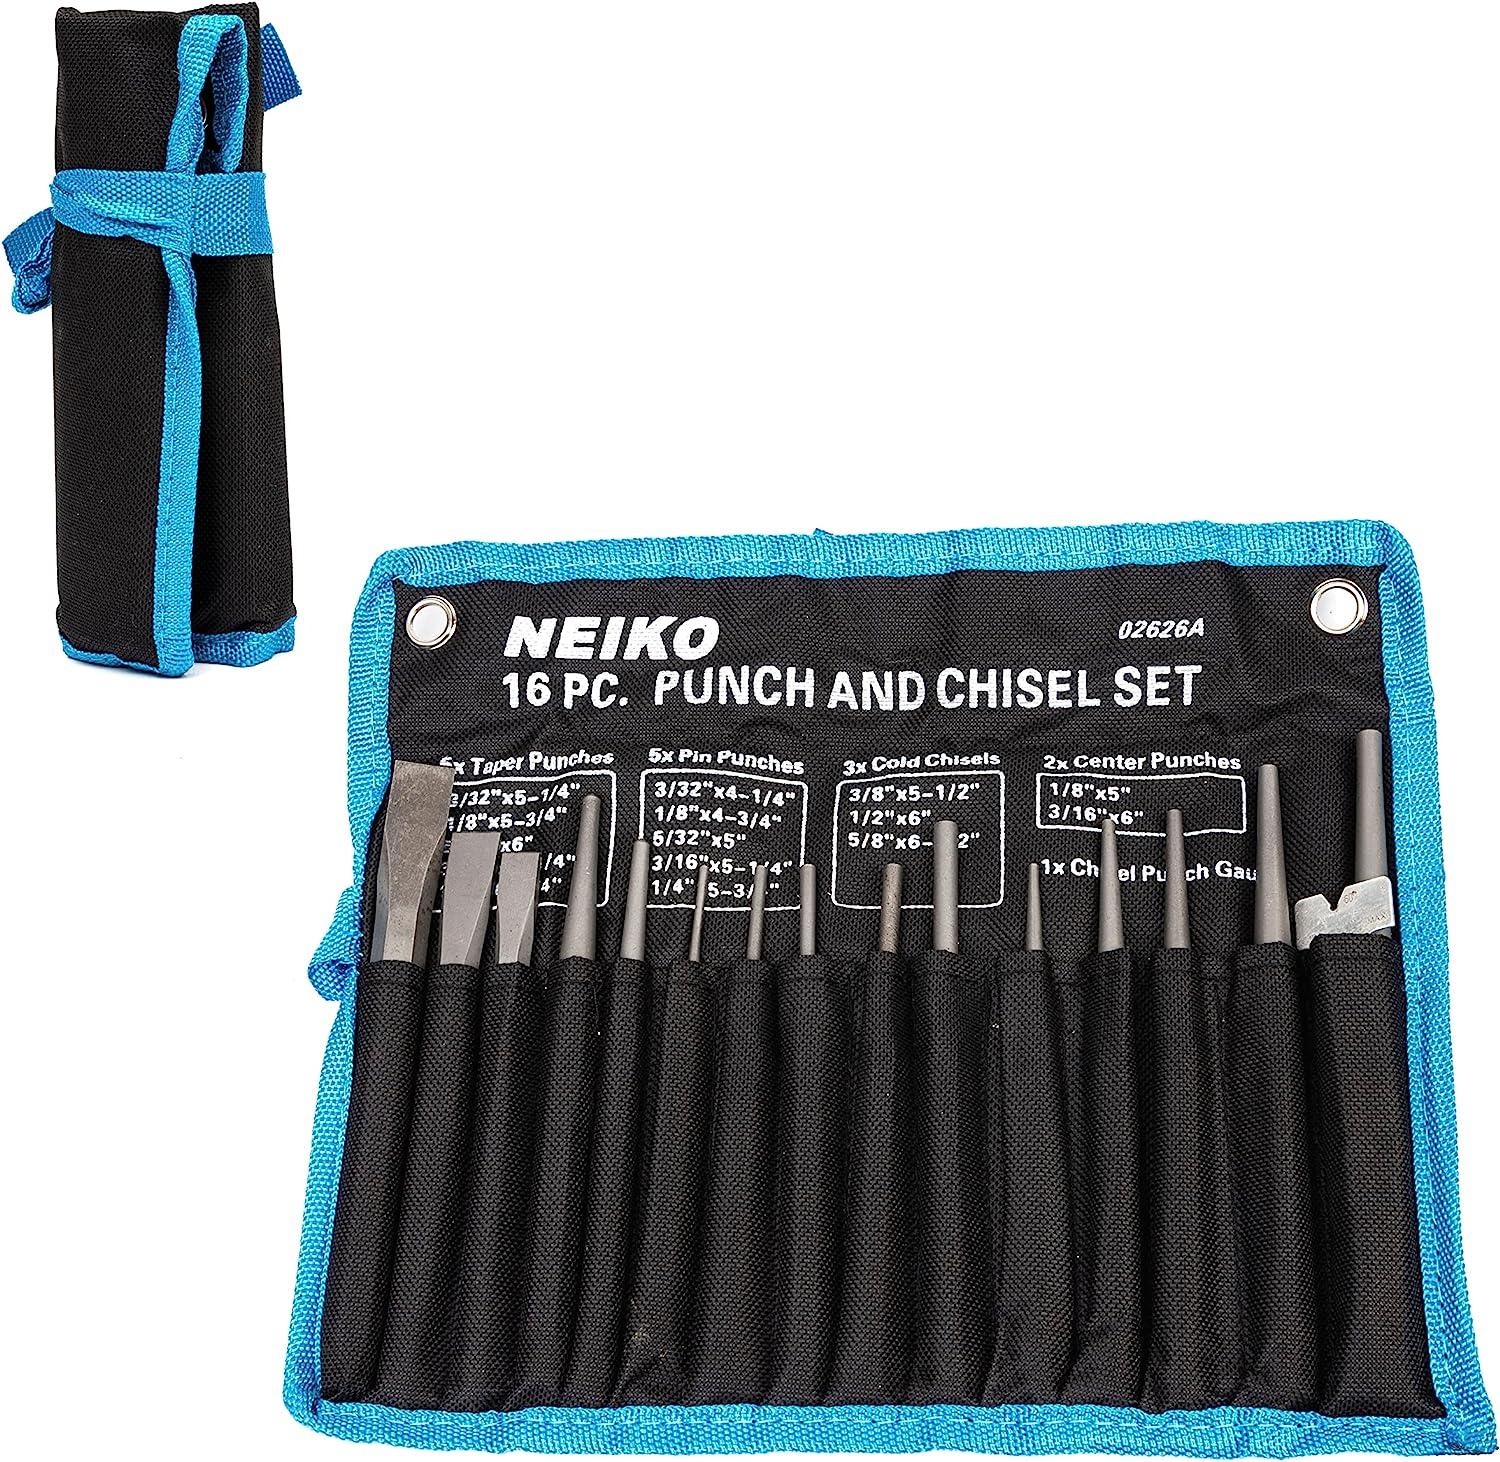 OEMTOOLS 25515 16 Piece Punch and Chisel Set, Punch Set, Pin Punch Set,  Punch Tool, Metal Punch, Cold Chisel, Nail Punch Set, Pin Set, Punch Set  Tools - Metalwork Chisels 